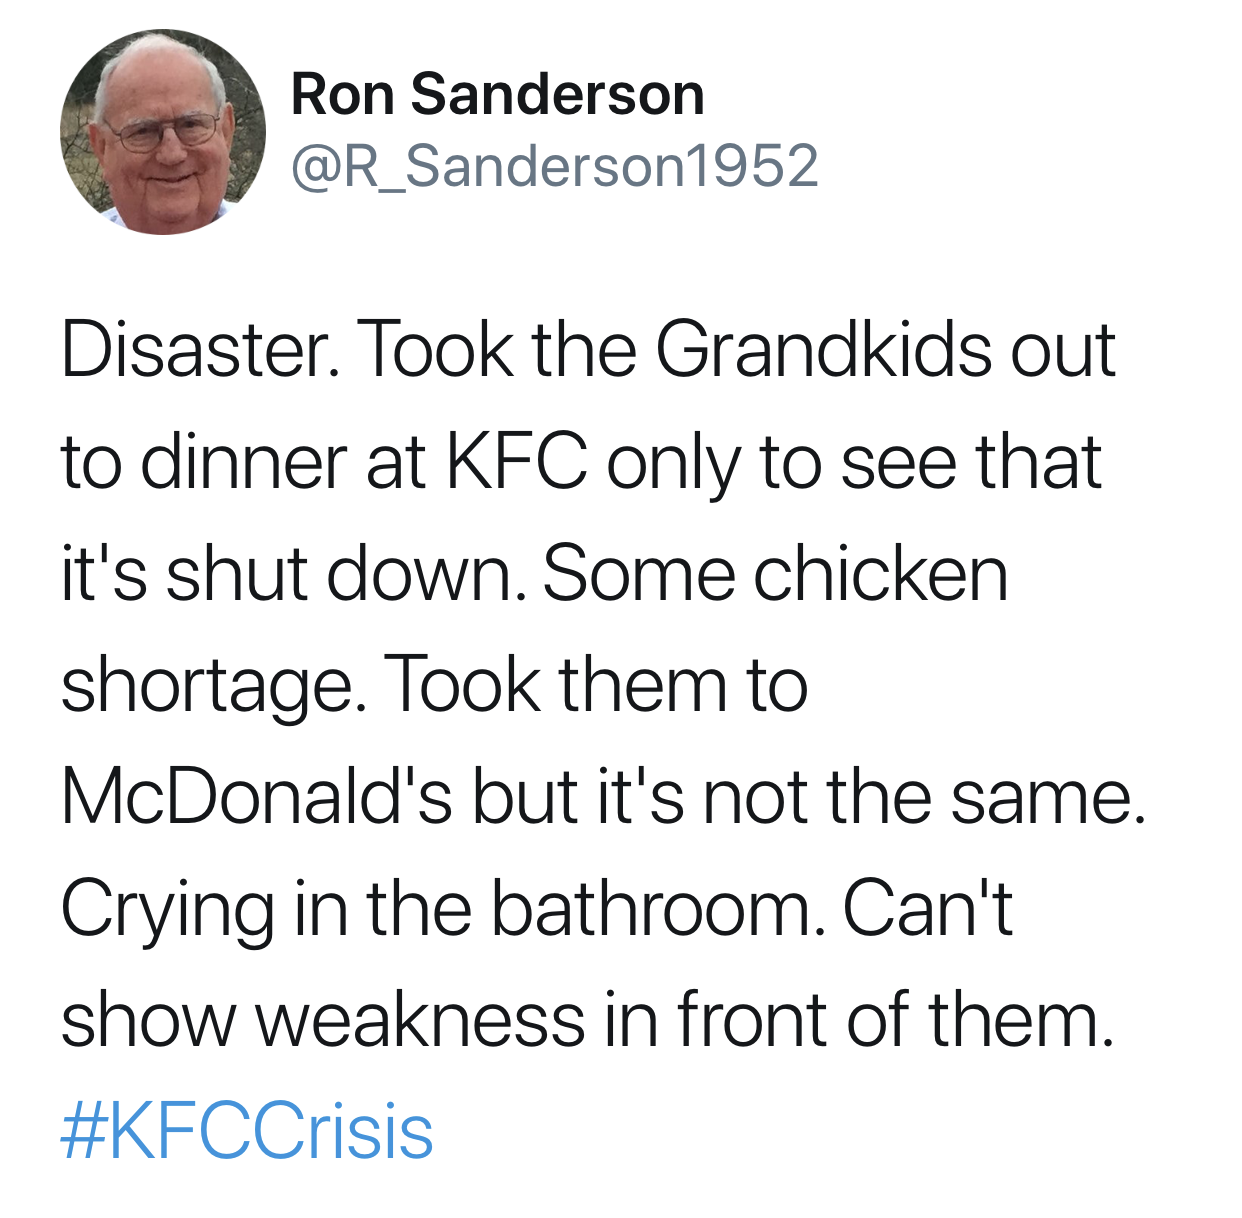 point - Ron Sanderson Disaster. Took the Grandkids out to dinner at Kfc only to see that it's shut down. Some chicken shortage. Took them to McDonald's but it's not the same. Crying in the bathroom. Can't show weakness in front of them.